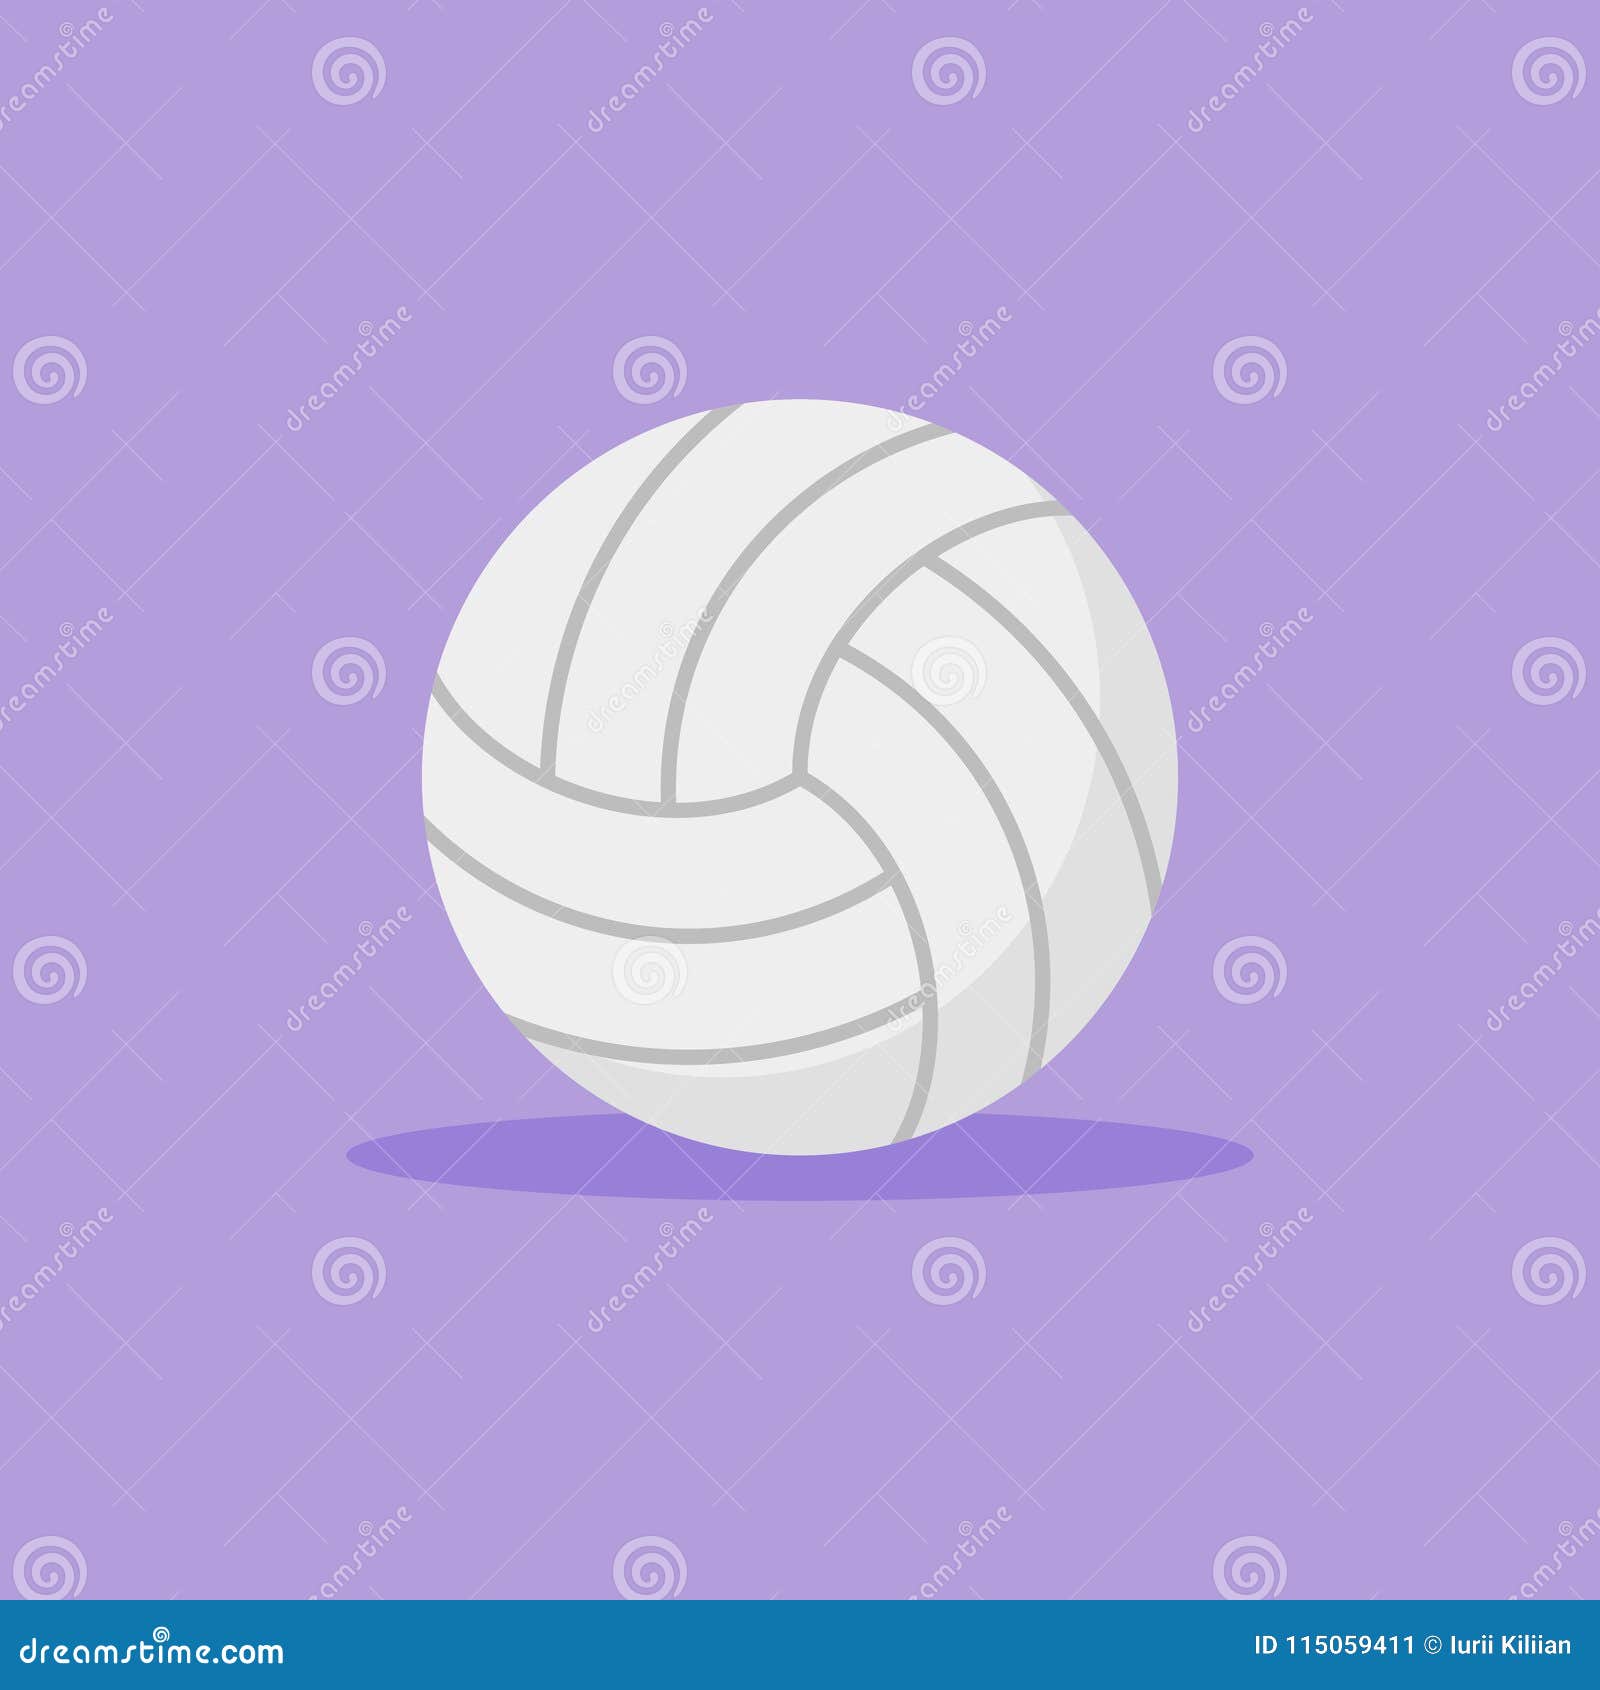 Volleyball Flat Style Icon. Ball Vector Illustration. Stock Vector ...